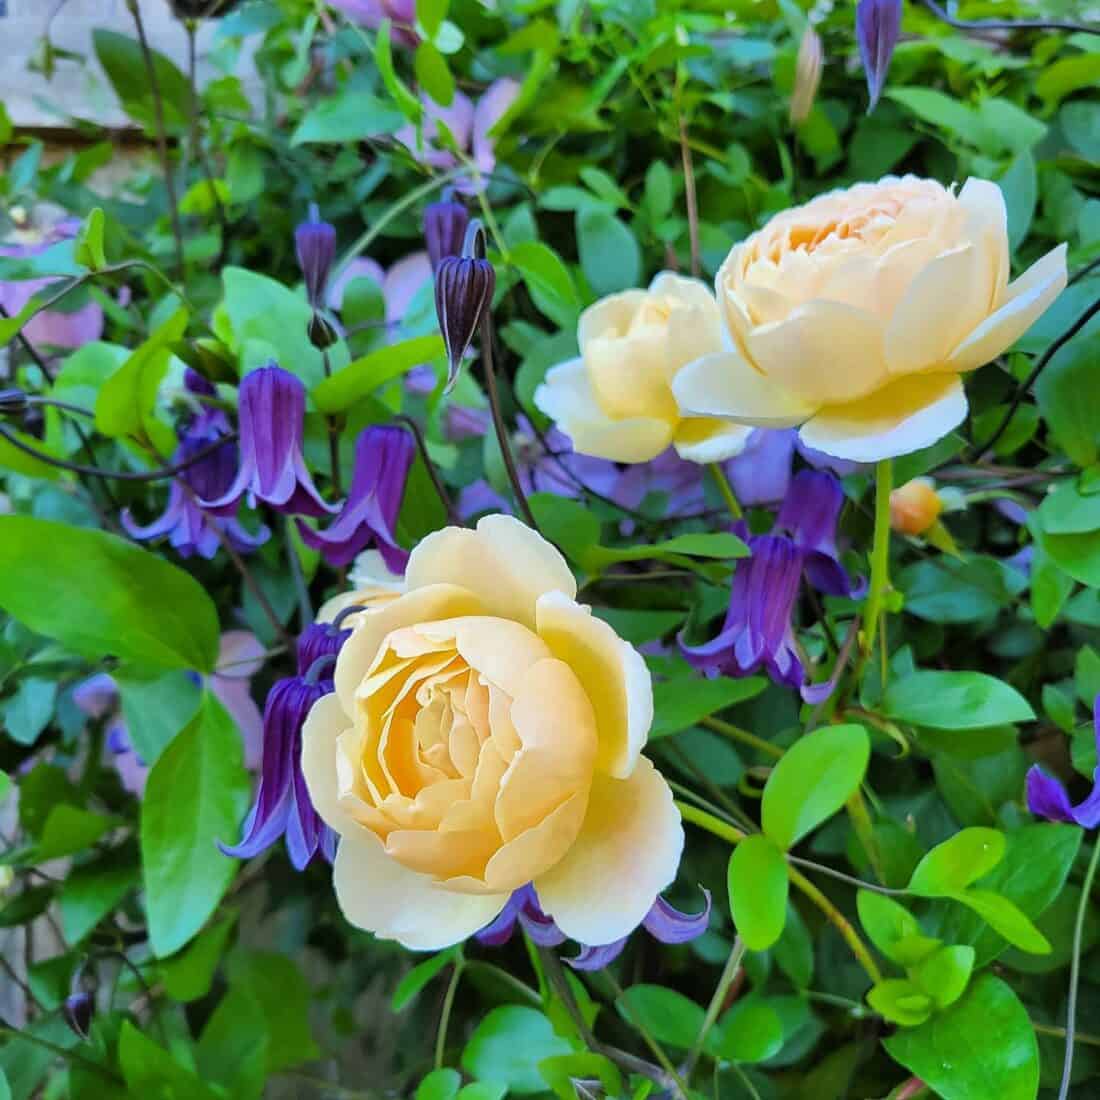 Pale yellow roses in bloom, nestled among purple Roguchi clematis flowers and green foliage.